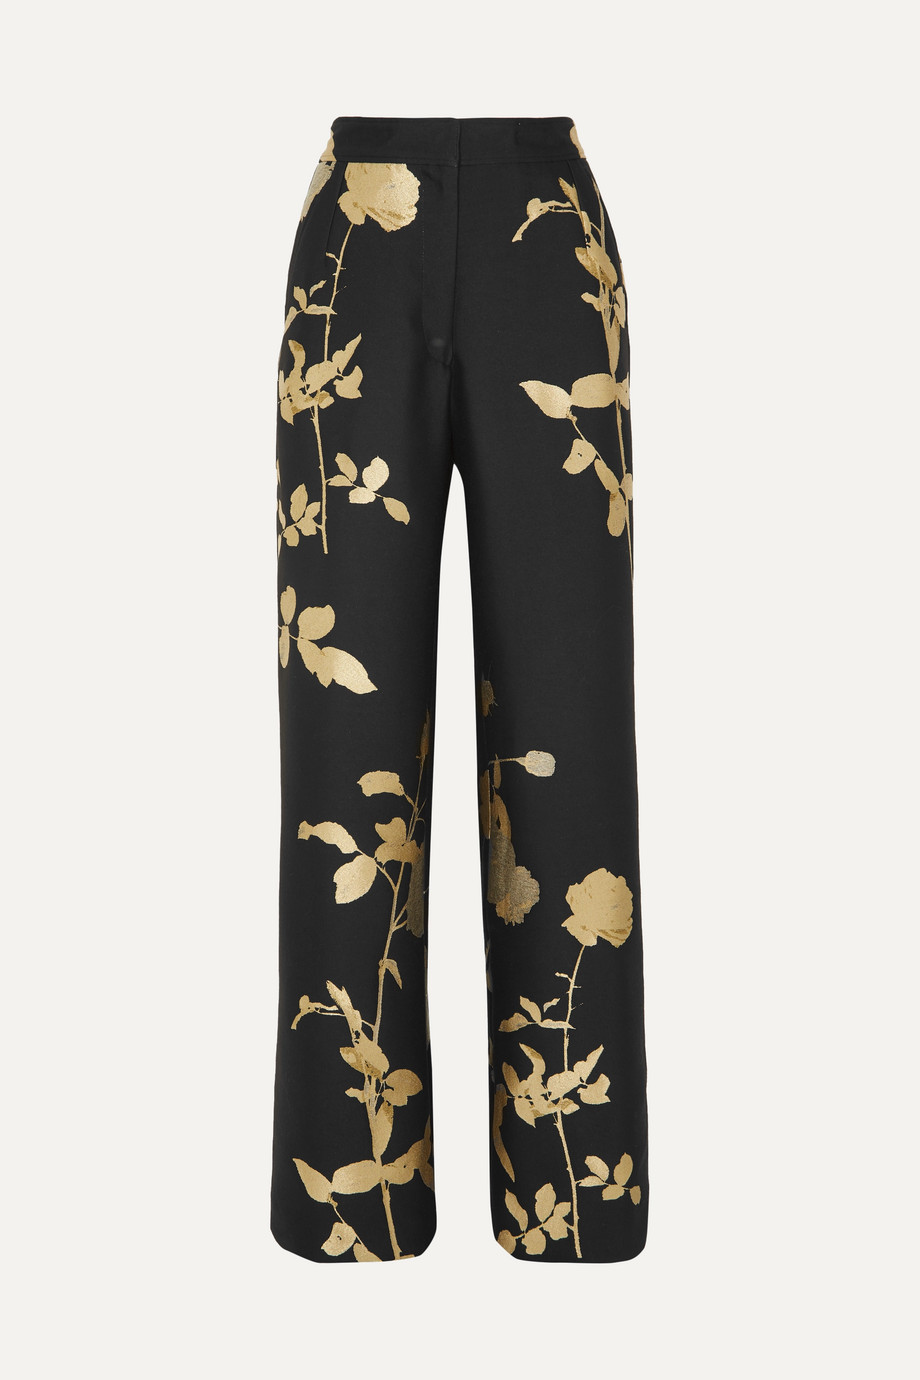 Dries Van Noten black and gold floral jacquard trousers